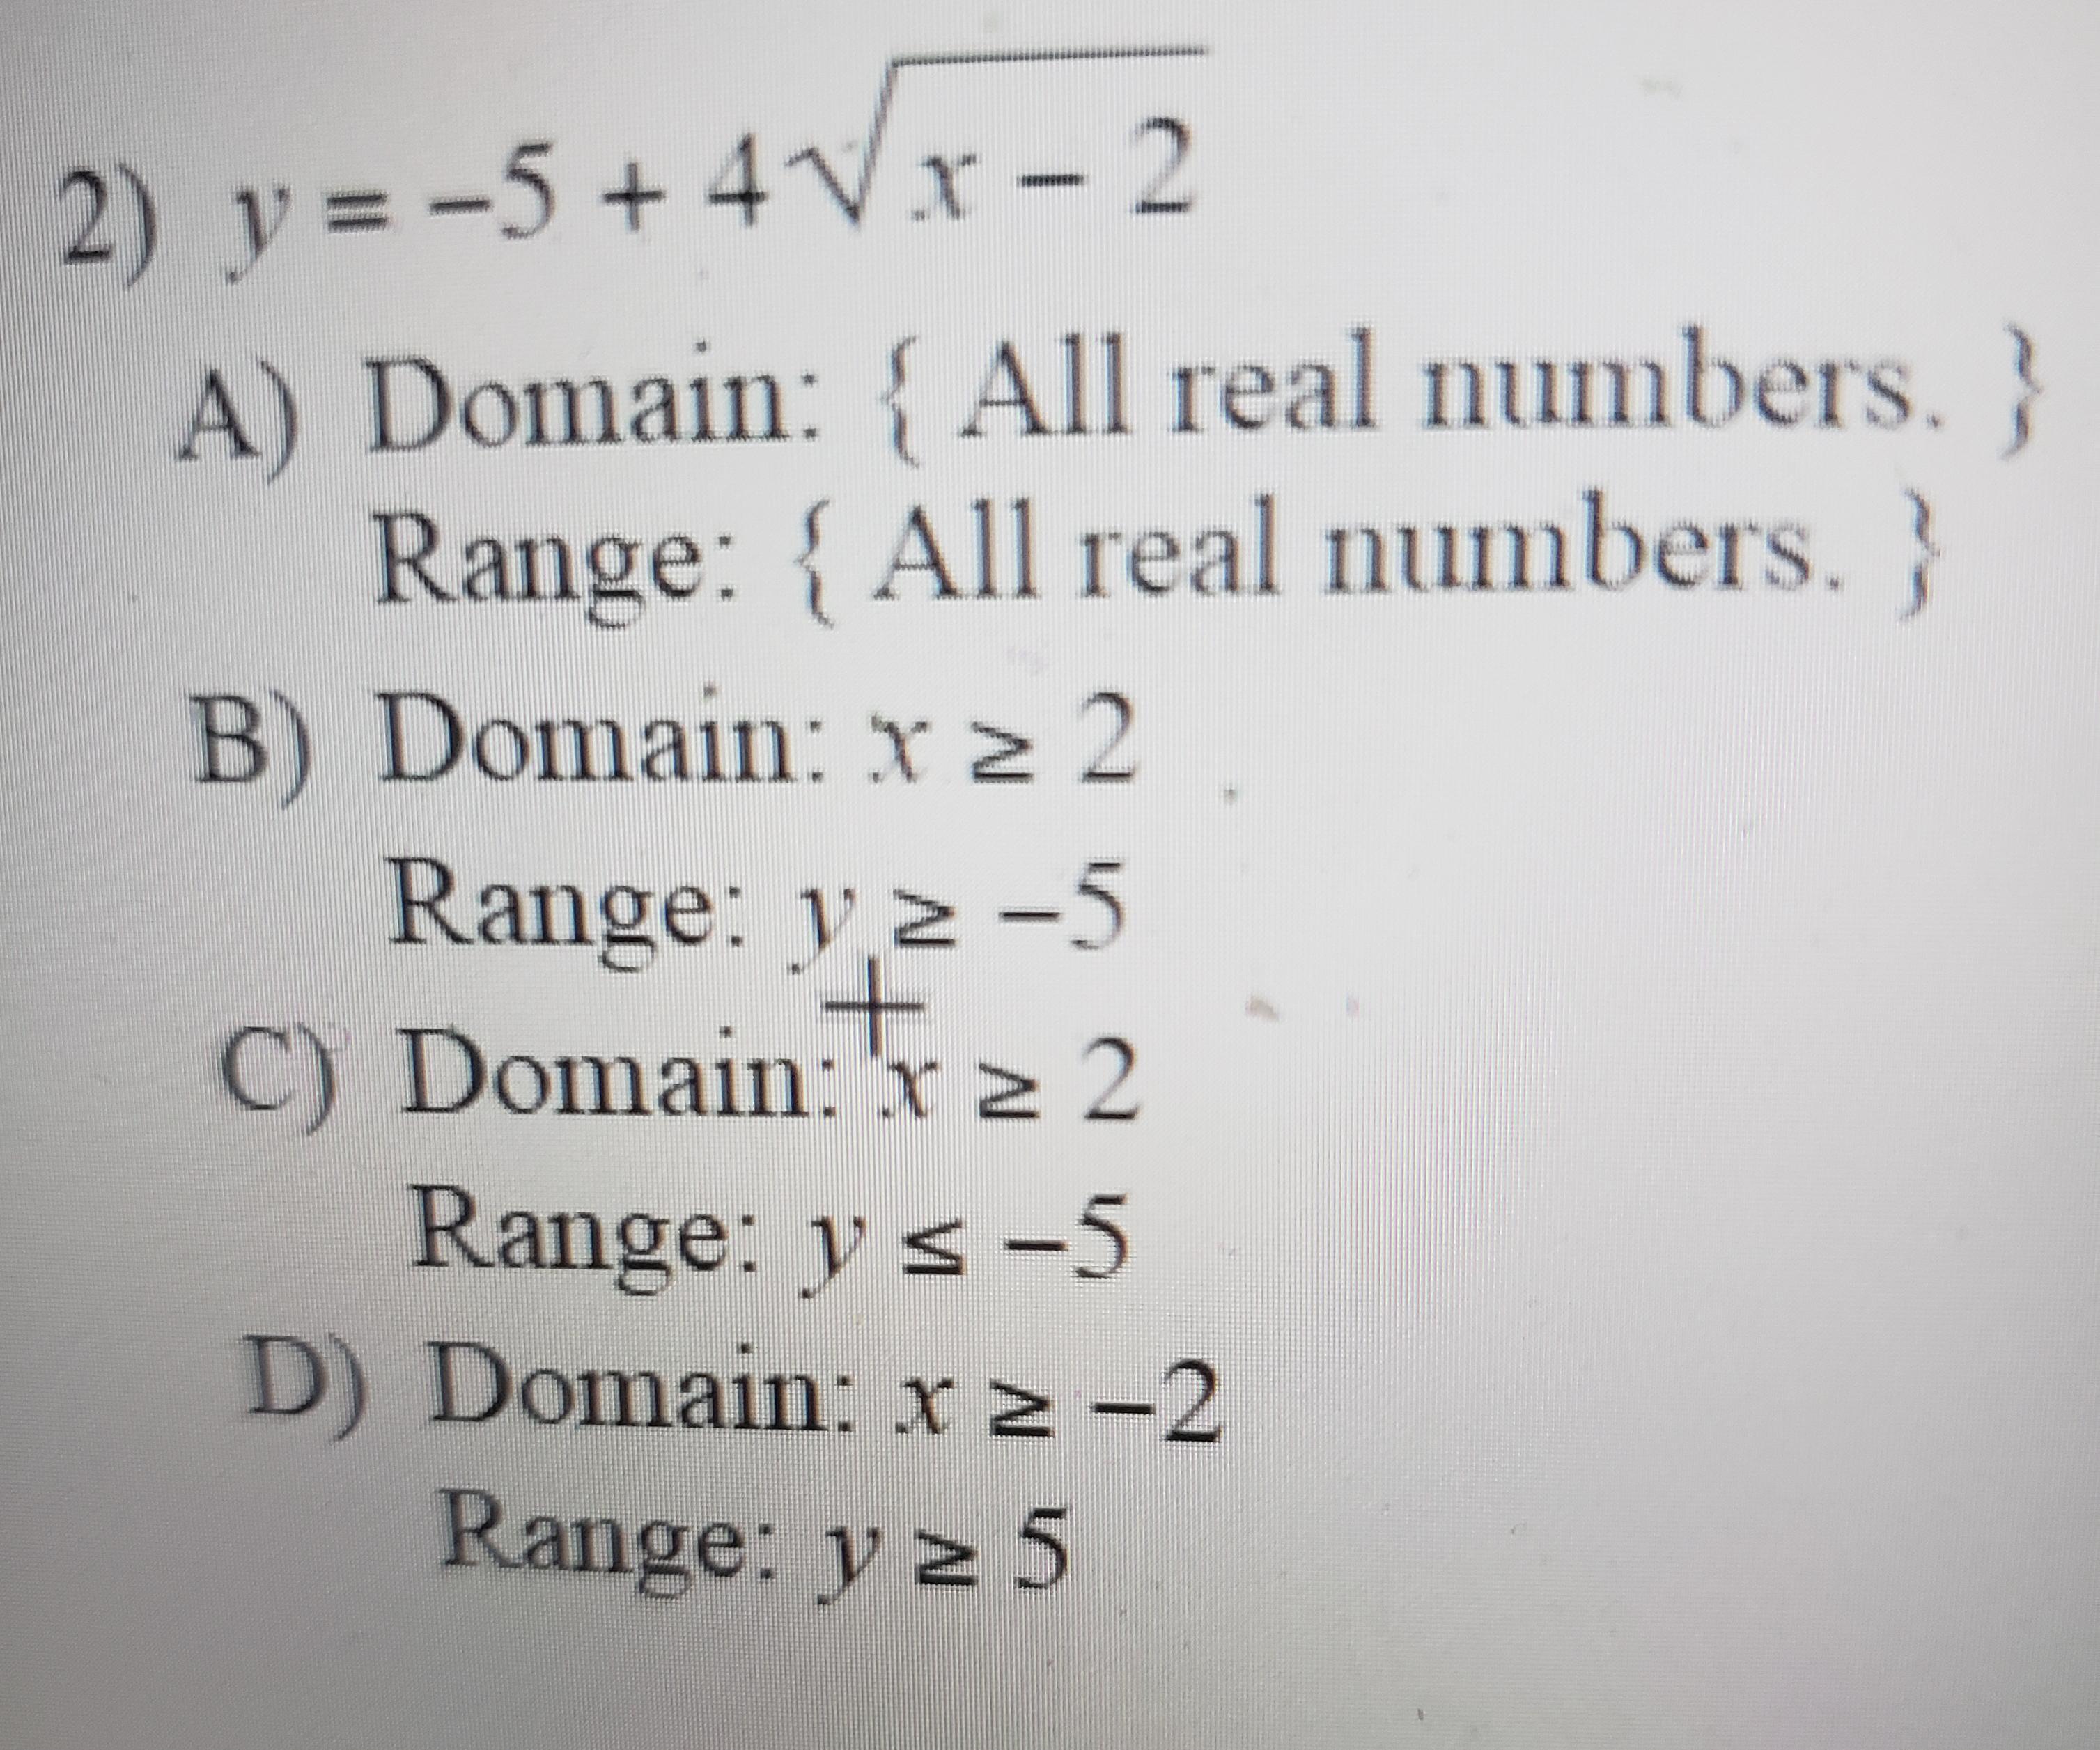 2) Y = -5 +4V7-2 A) Domain: { All Real Numbers. } Range: { All Real Numbers. } B) Domain: X 22 Range: